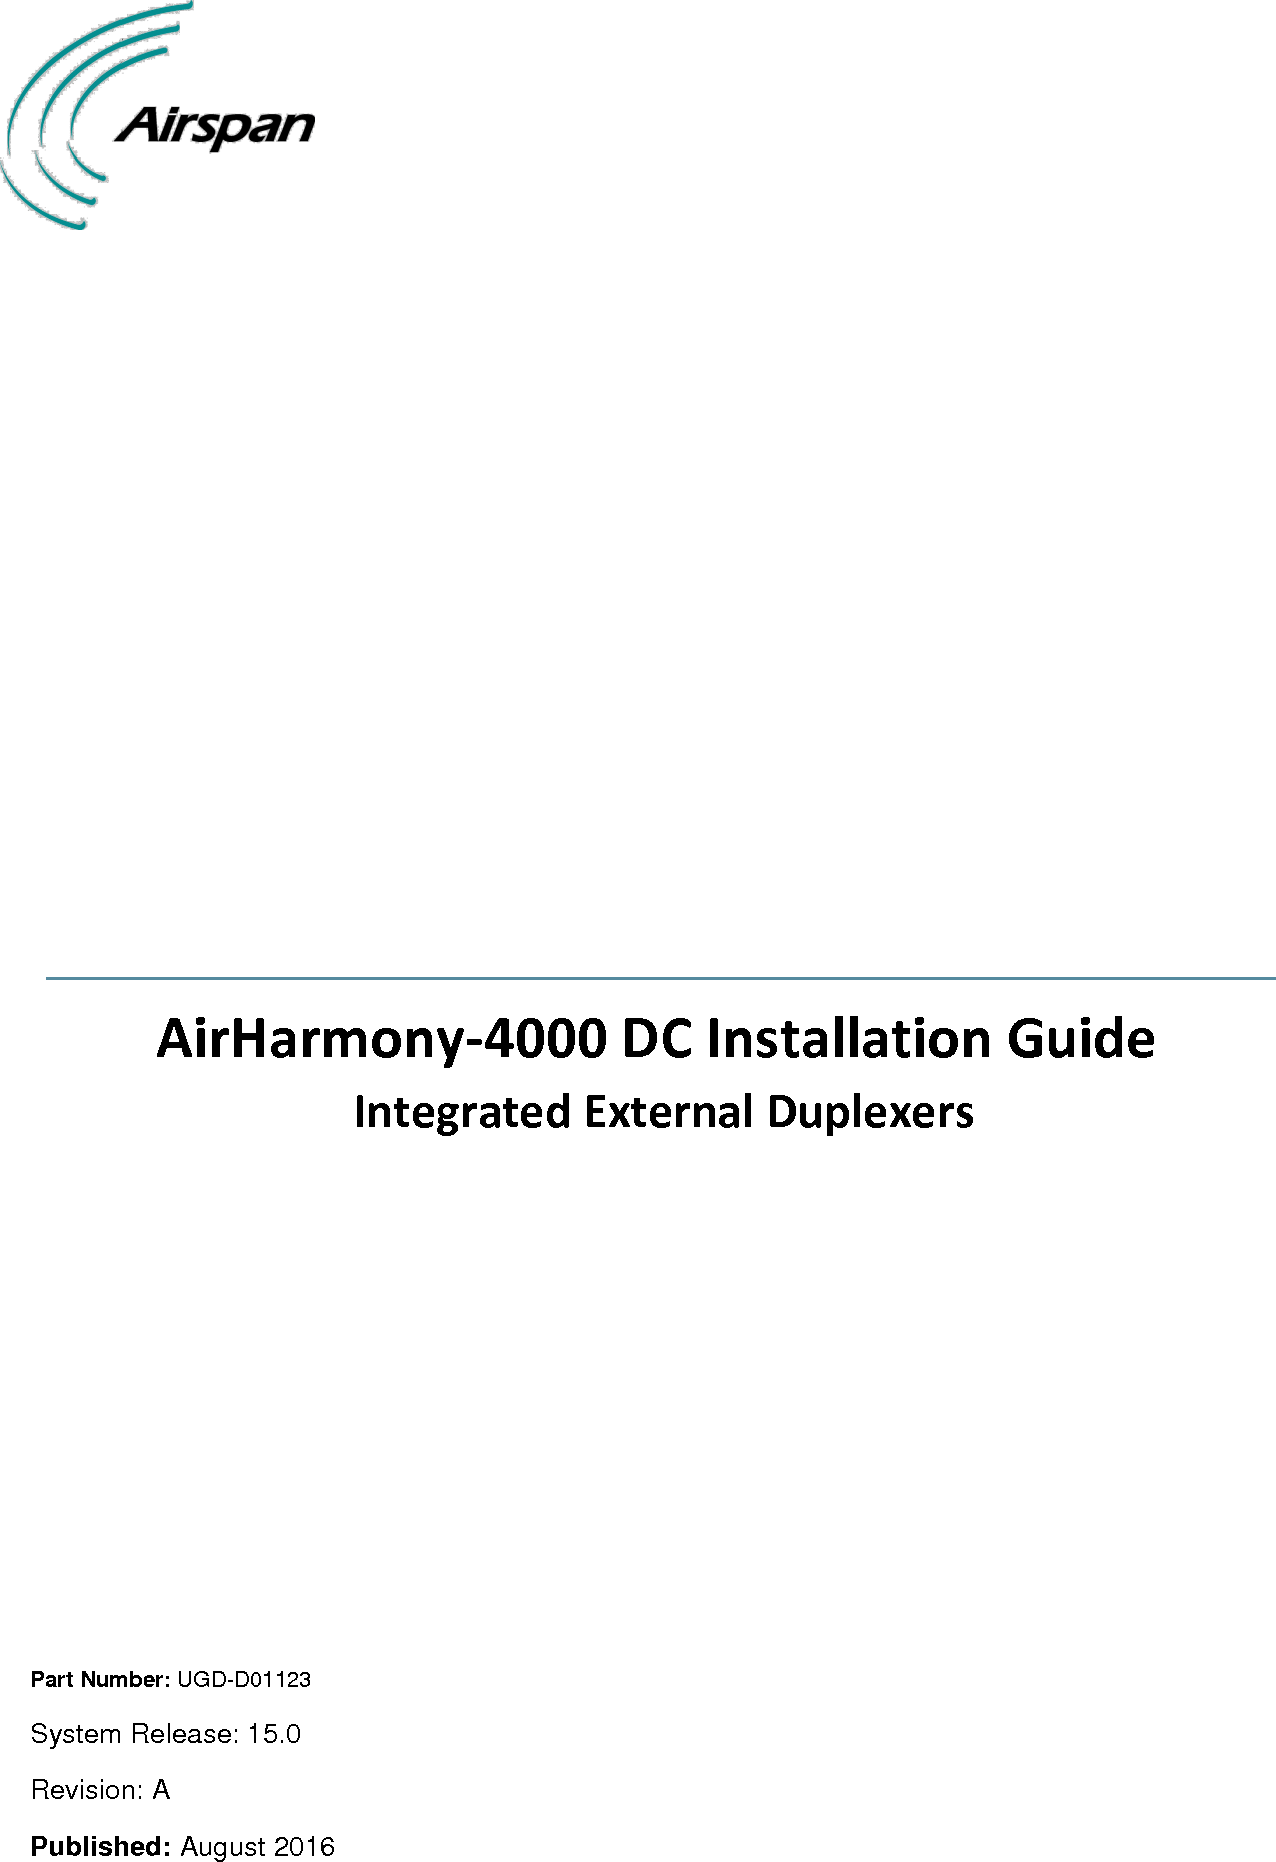                     AirHarmony-4000 DC Installation Guide  Integrated External Duplexers         Part Number: UGD-D01123 System Release: 15.0 Revision: A Published: August 2016 